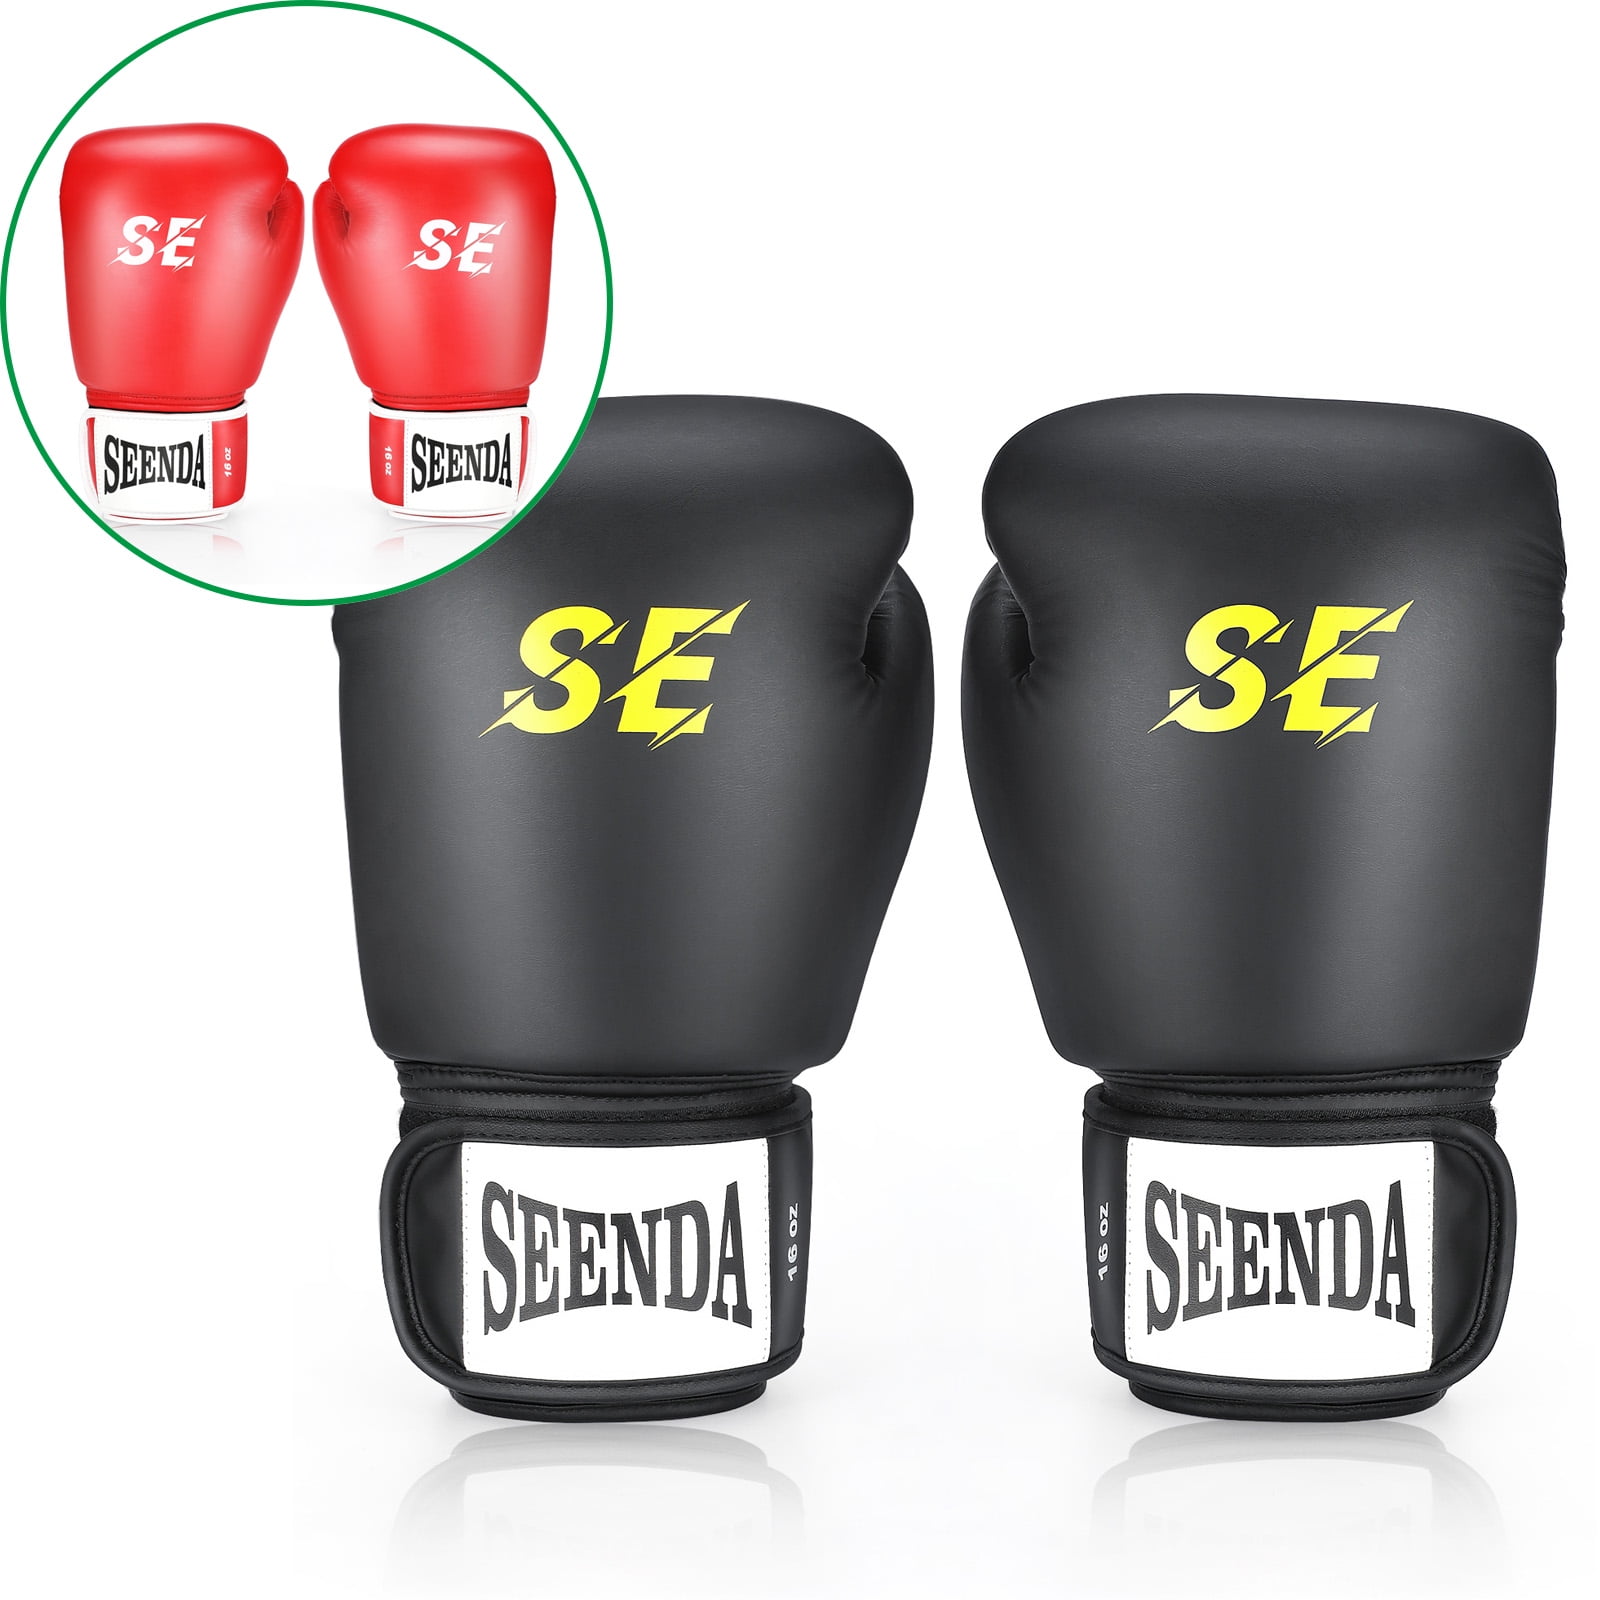 Red Boxing Gloves Training Sparring Punch Bag Mitts Fight MMA Muay Thai UK 